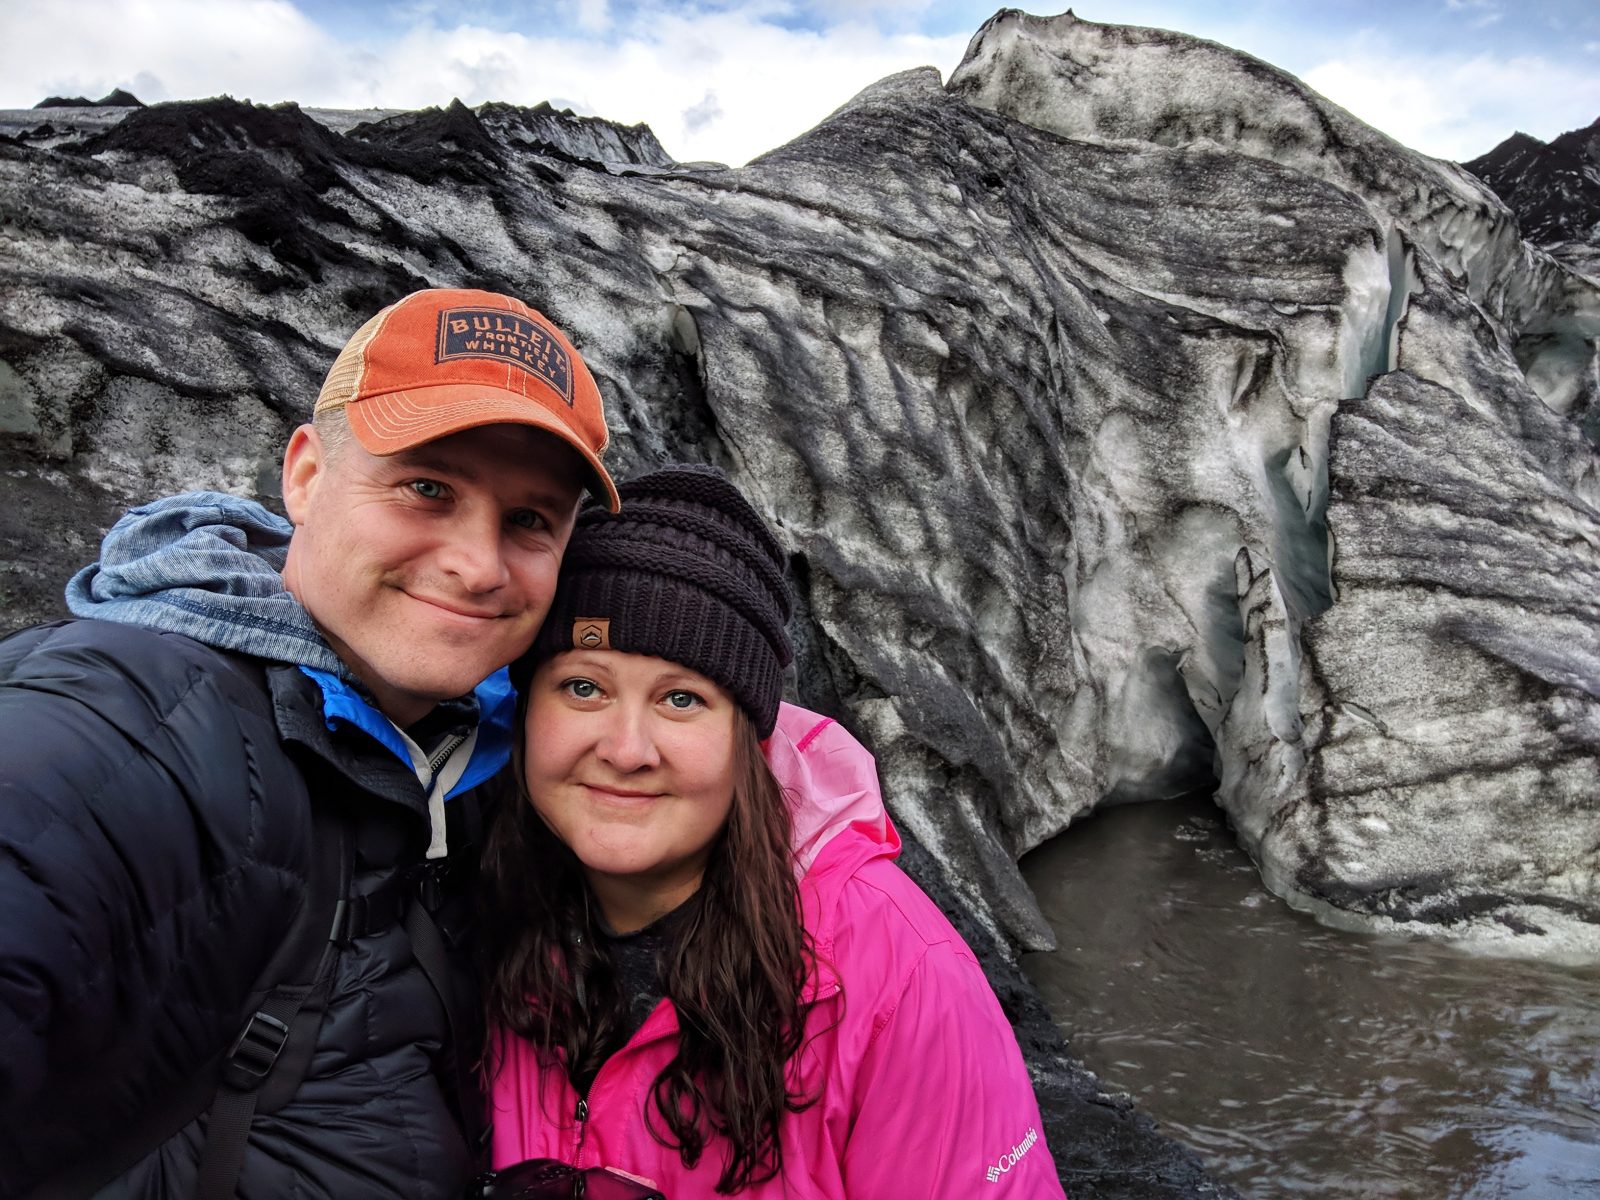 The Stripe Transfer specialists, Colin and Eliza in Iceland